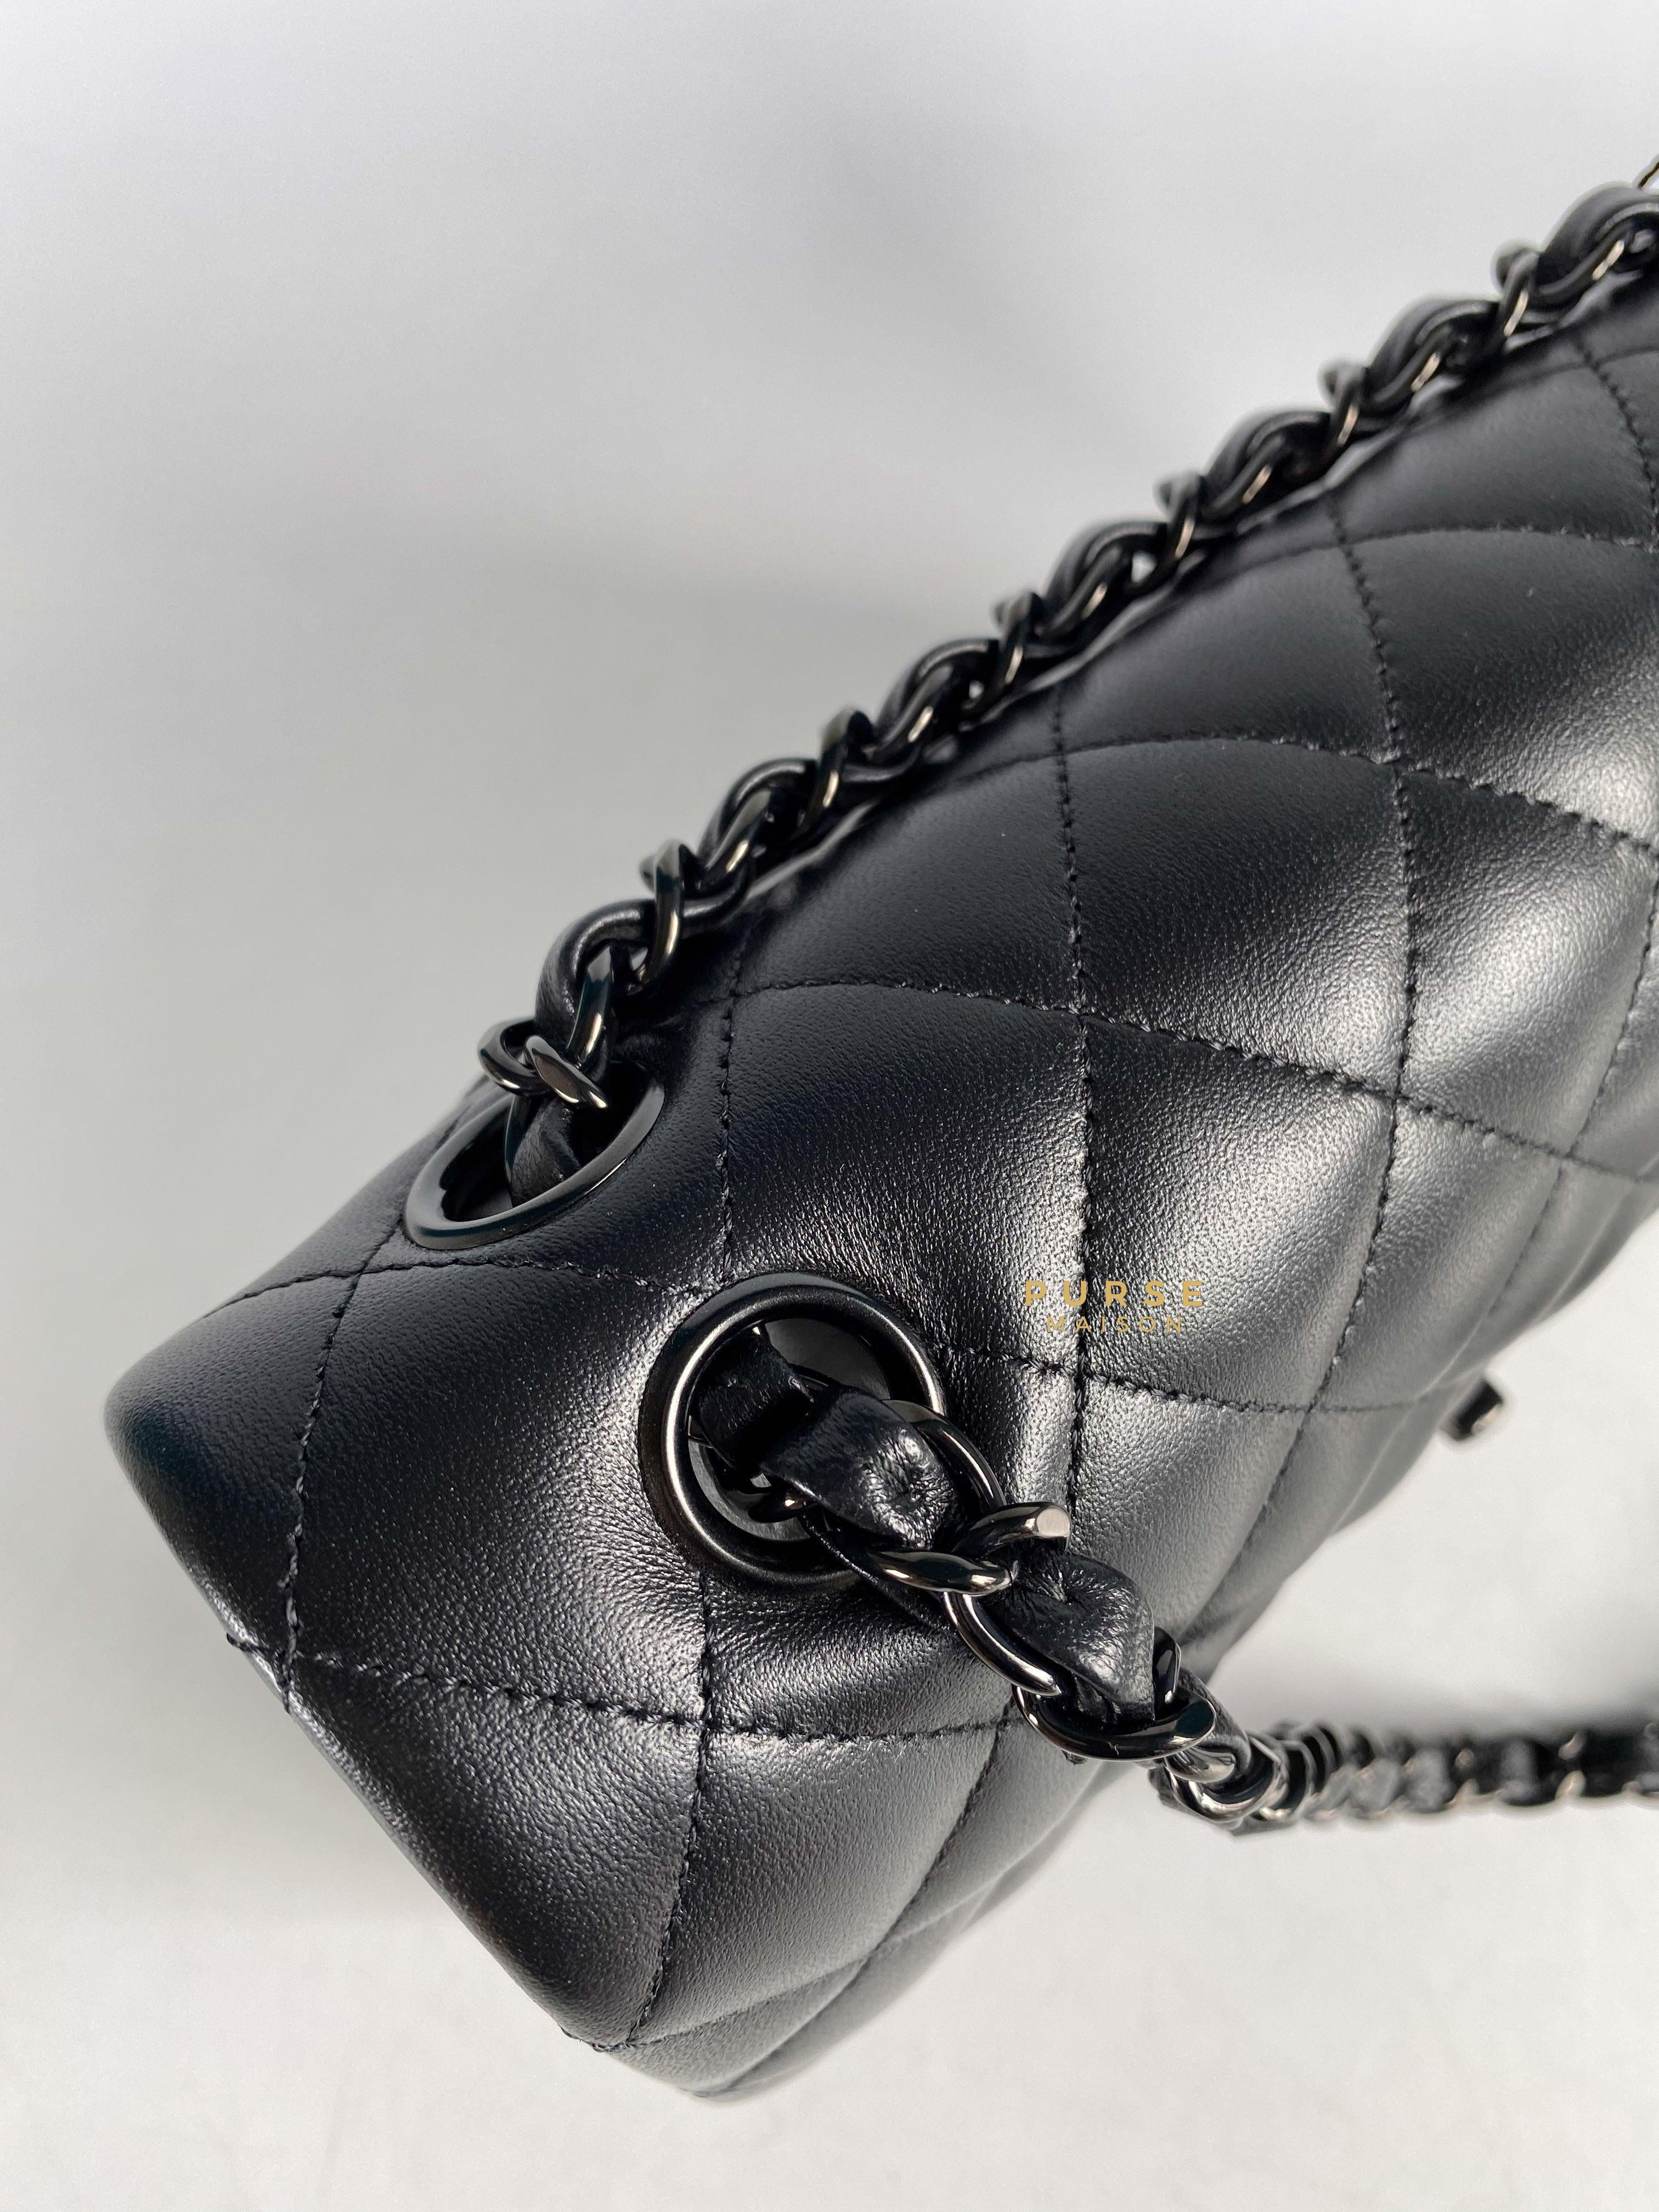 Chanel So Black Small Double Classic Flap in Lambskin Leather (Microchip) | Purse Maison Luxury Bags Shop